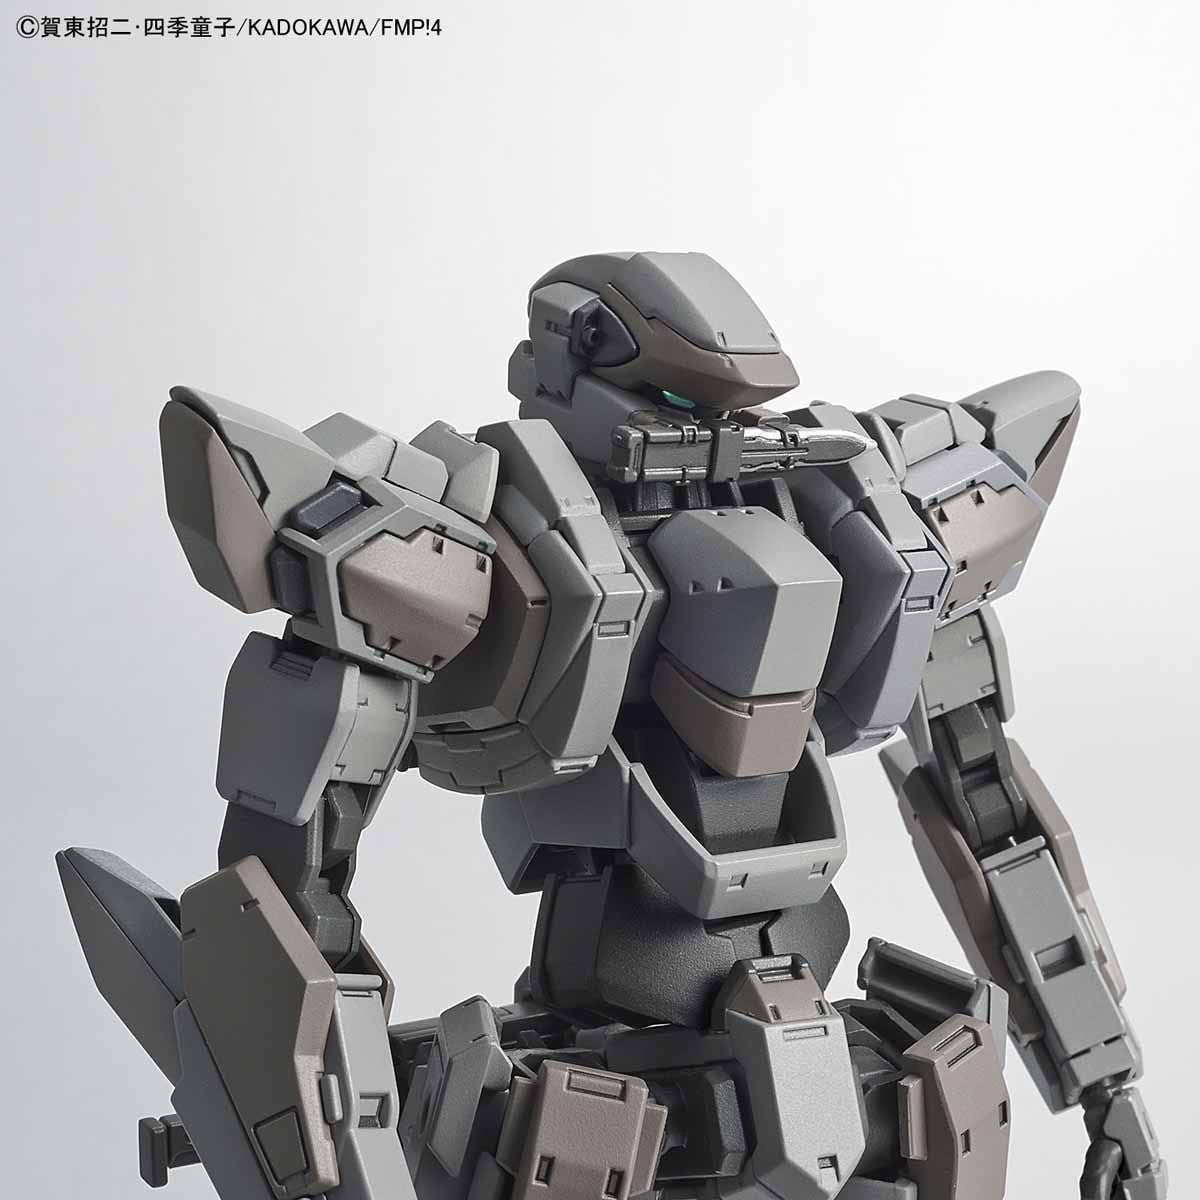 HG 1/60 Arbelest Ver. IV (With XL-2 Booster) - Glacier Hobbies - Bandai